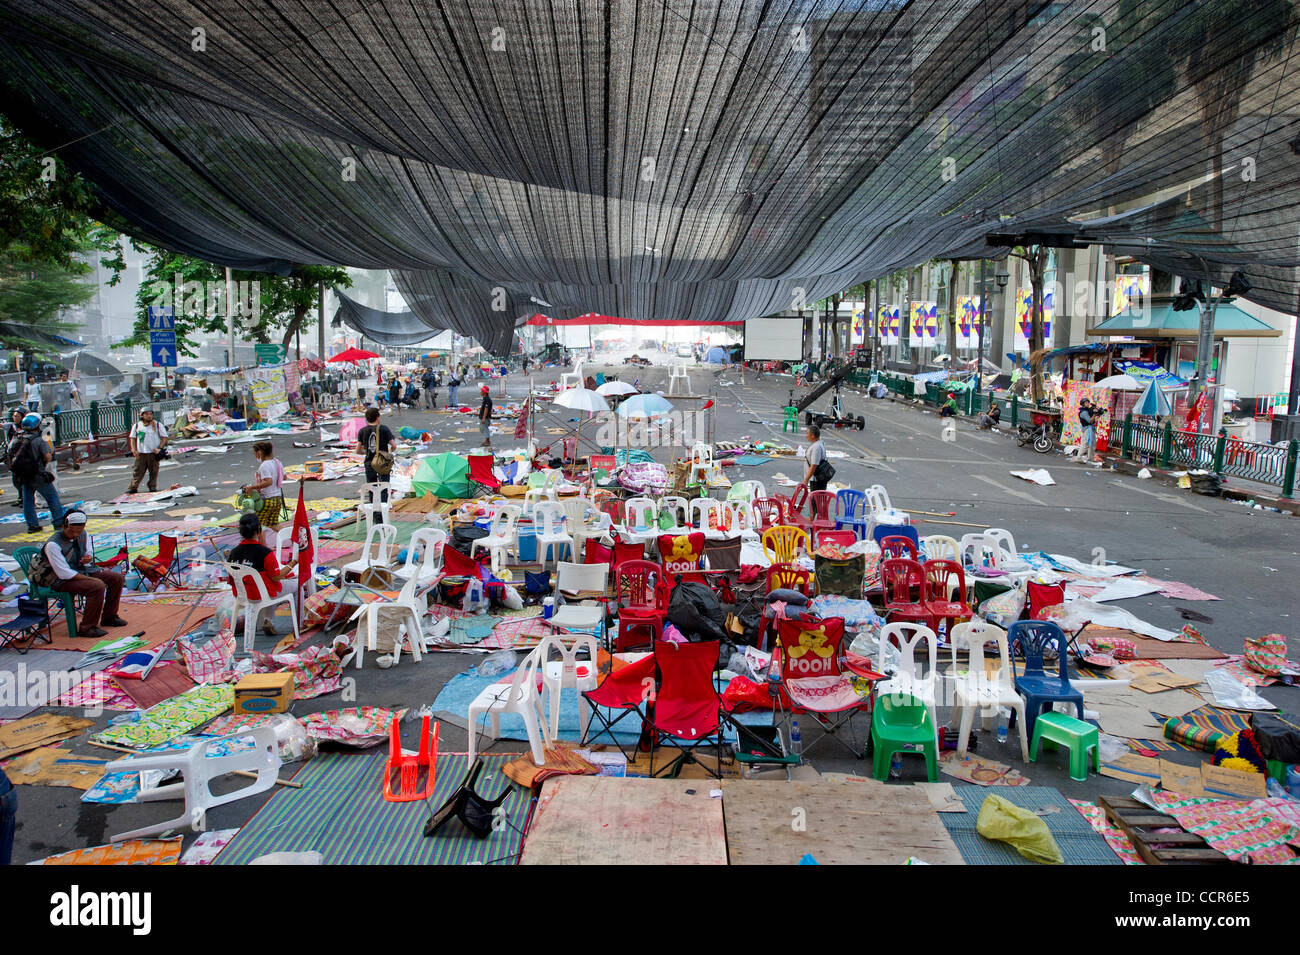 Chairs left by Red Shirts protesters after Thai government crack down on Red Shirts. Red Shirts leaders have now surrendered and told thousands of Red Shirts protesters to end their months-long protest after Thai army assault on their fortified camp. Stock Photo